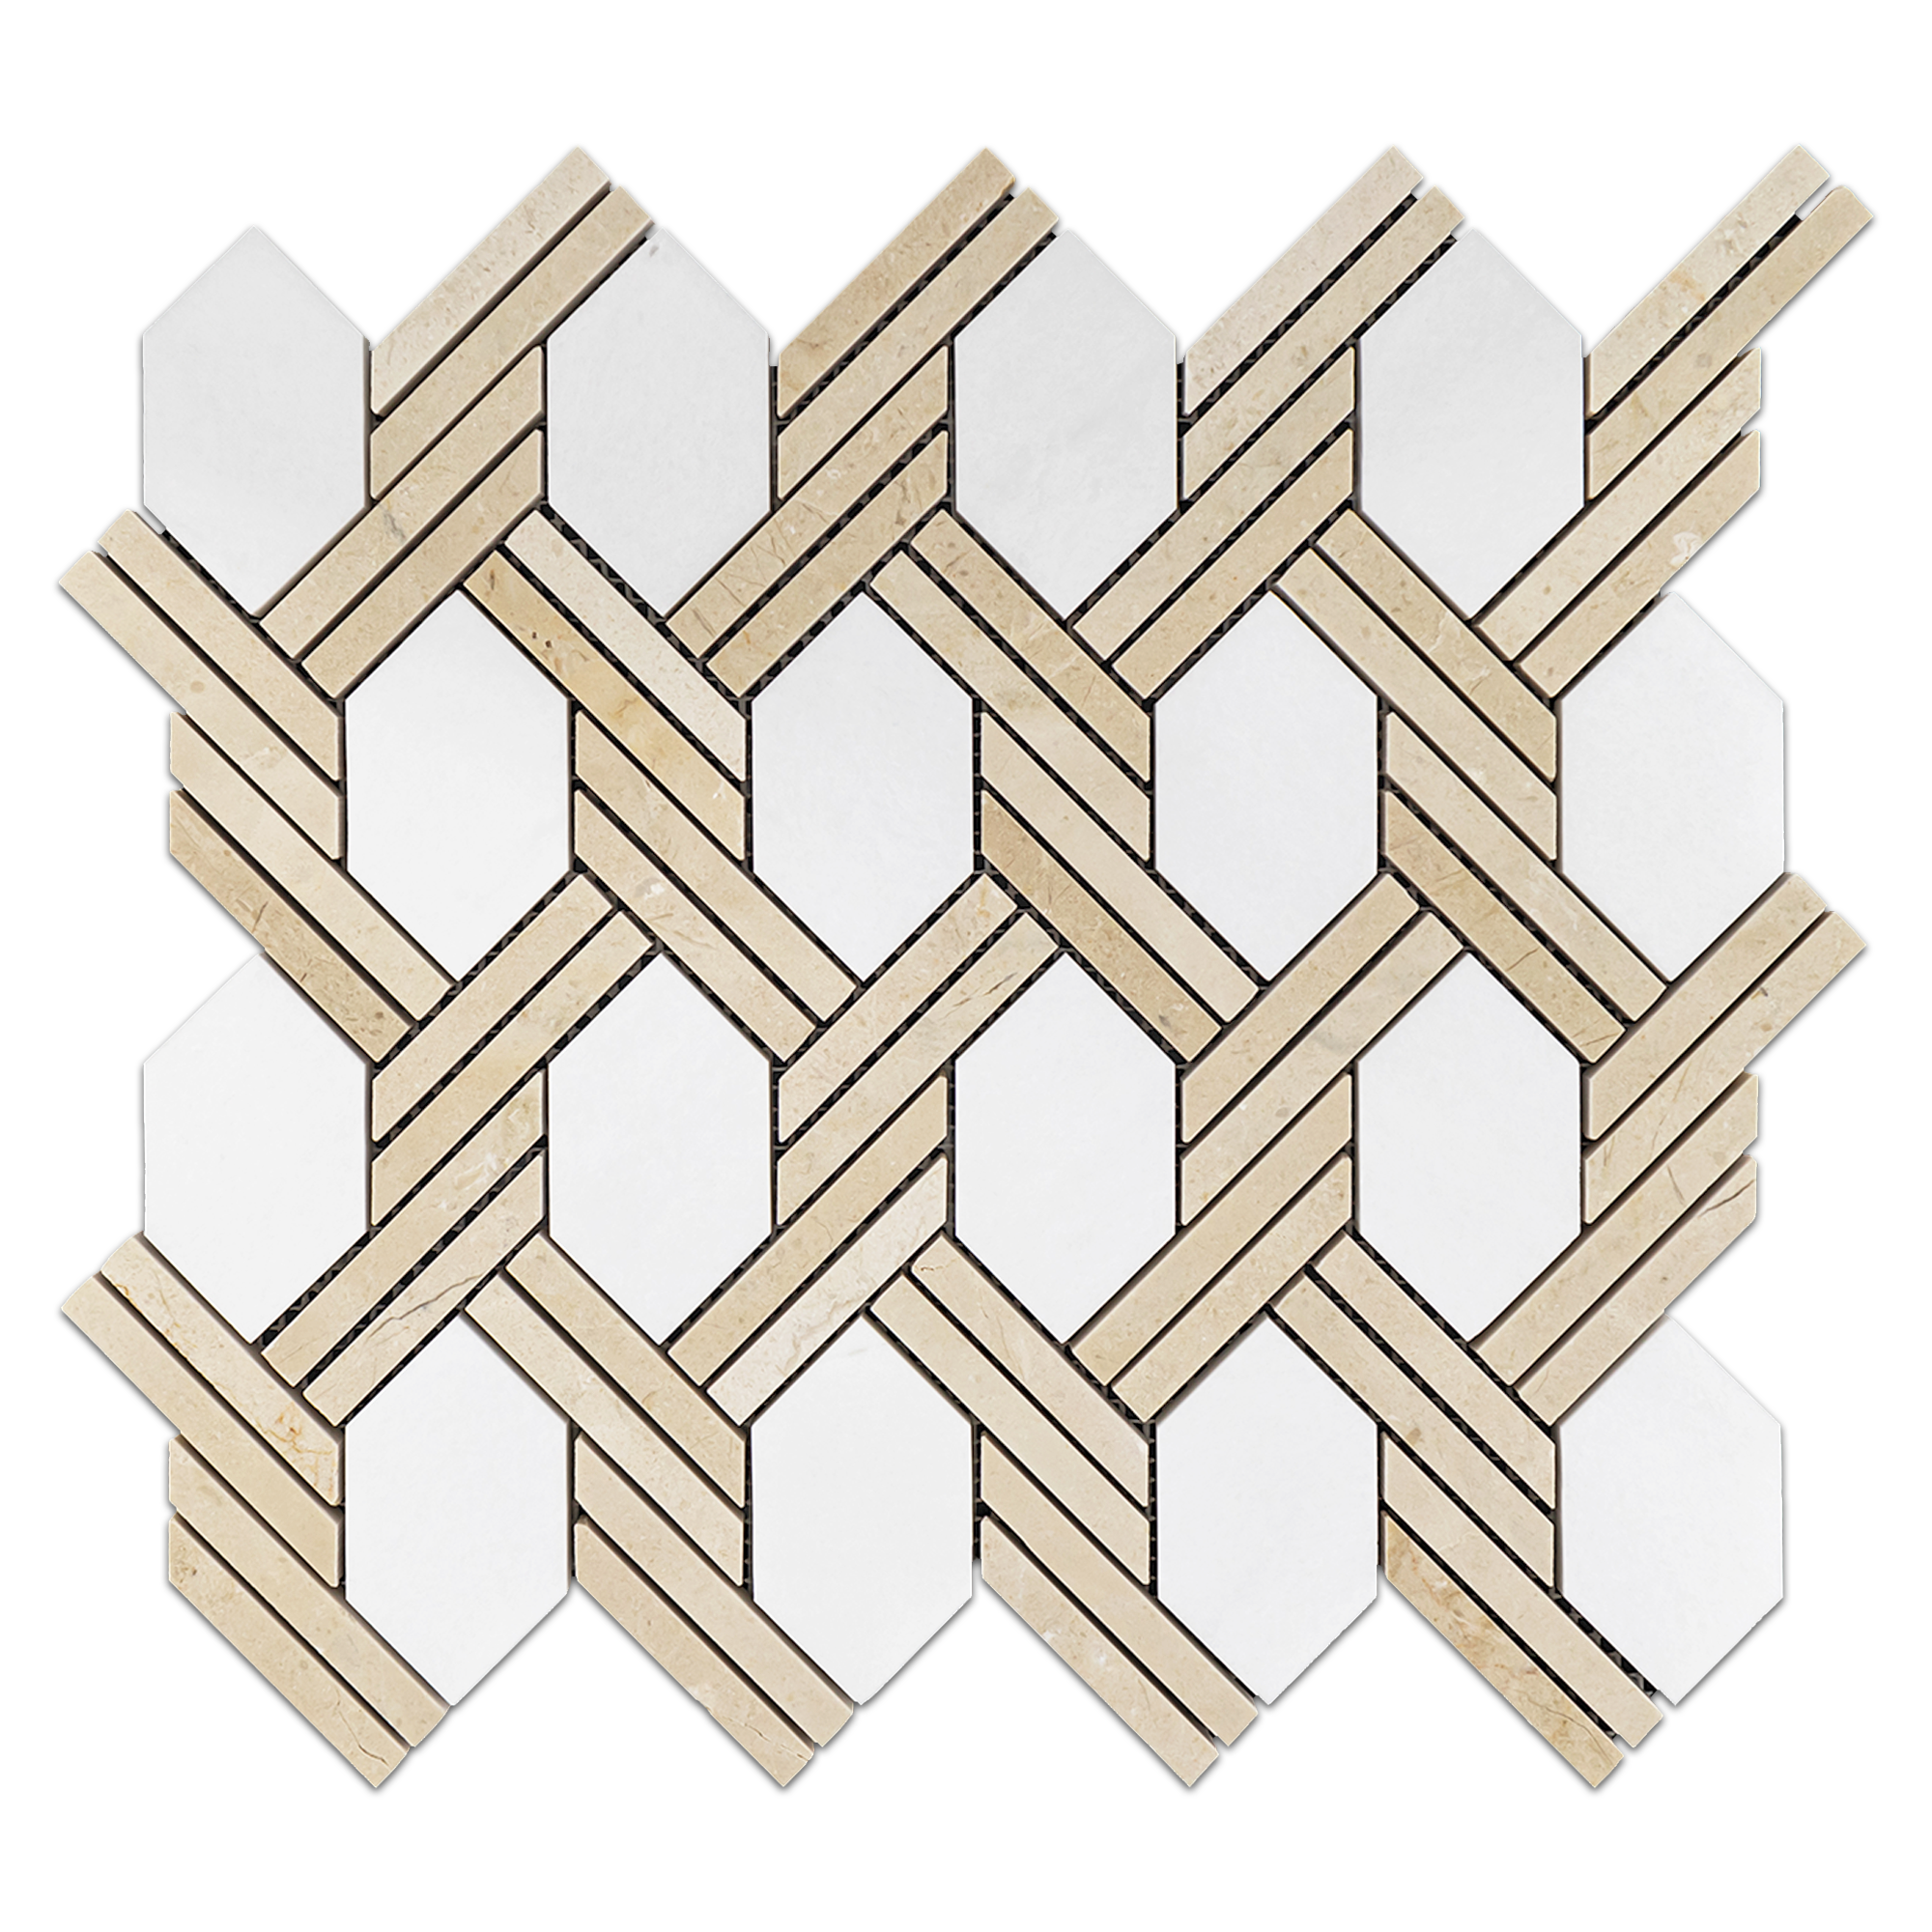 Elon White Thassos Crema Marfil Marble Braided Picket Field Mosaic 11.625x12.875x0.375 Polished - Surface Group International Product